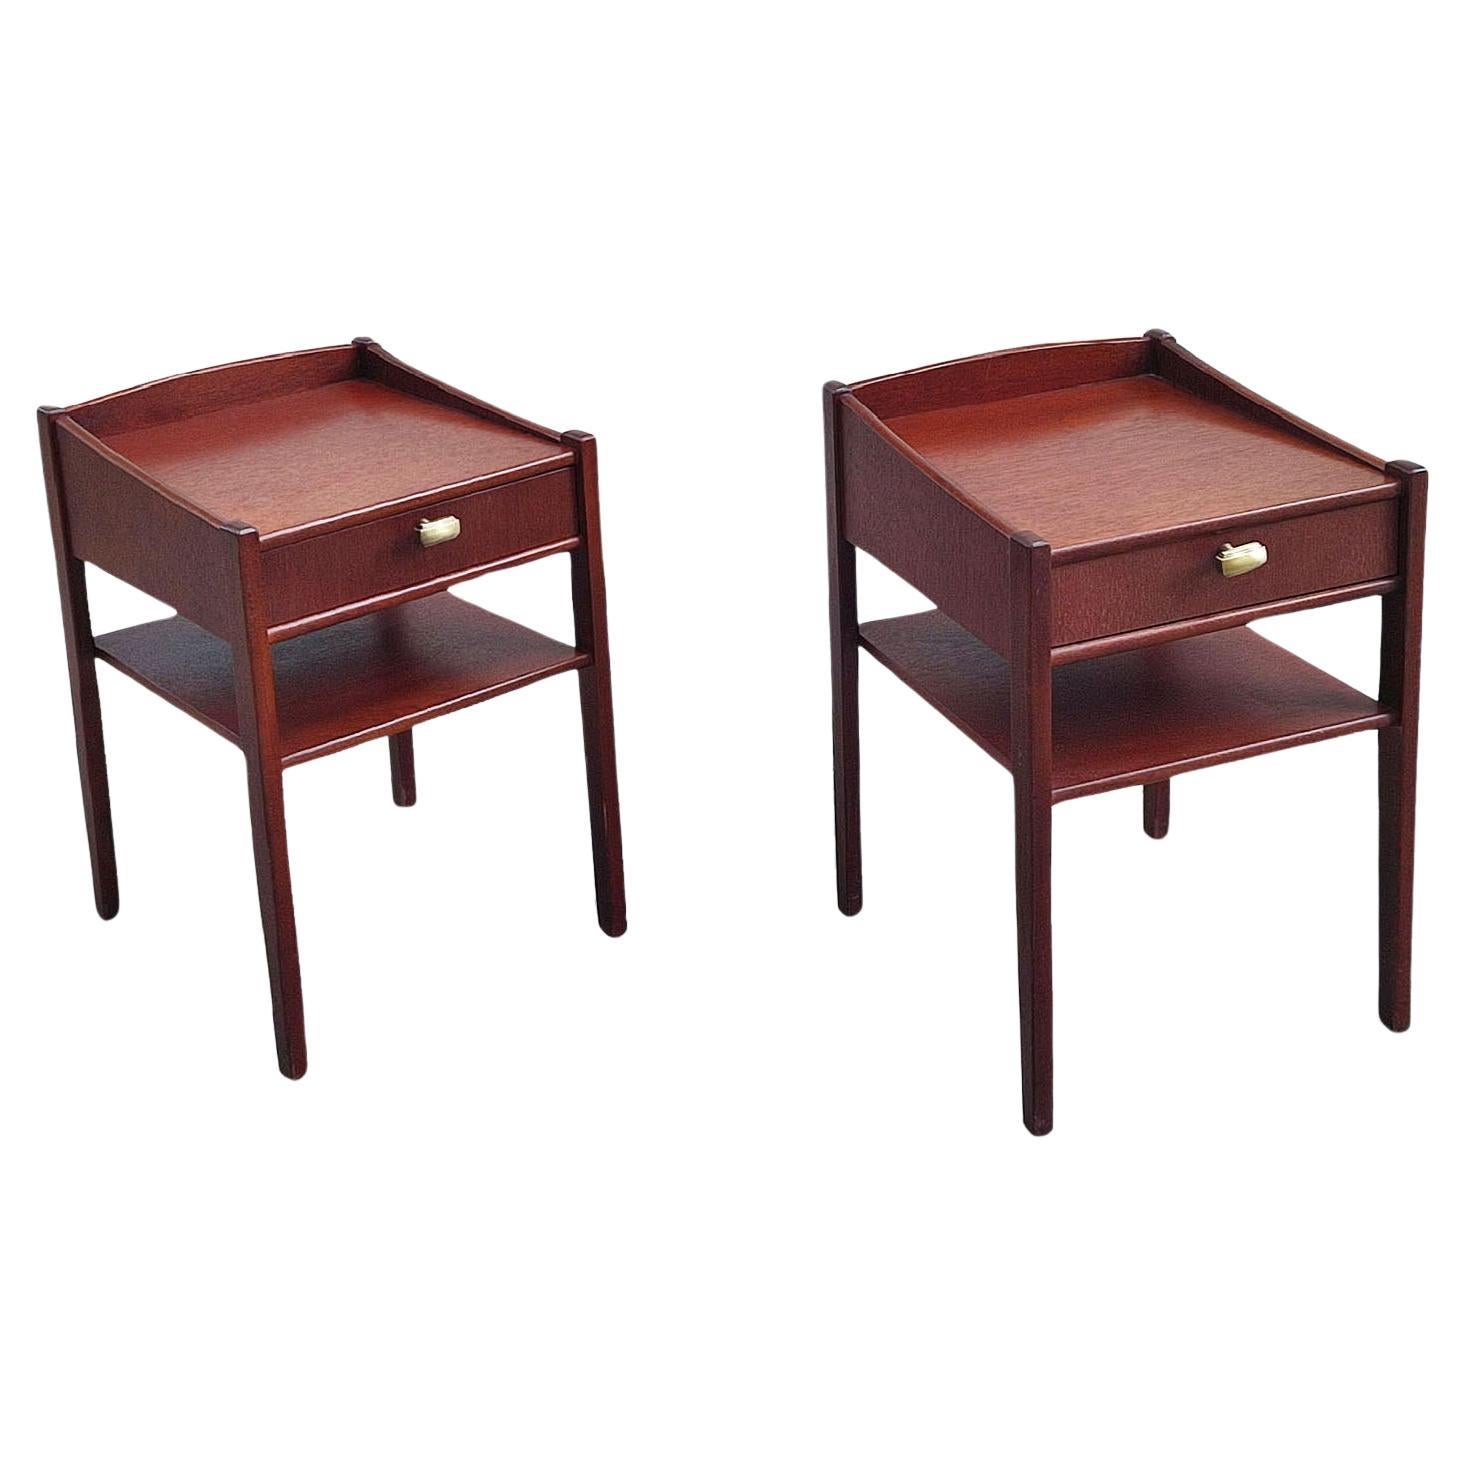 Pair of Mid-century Swedish Mahogany Nightstands, Bedside Tables, 1960s For Sale